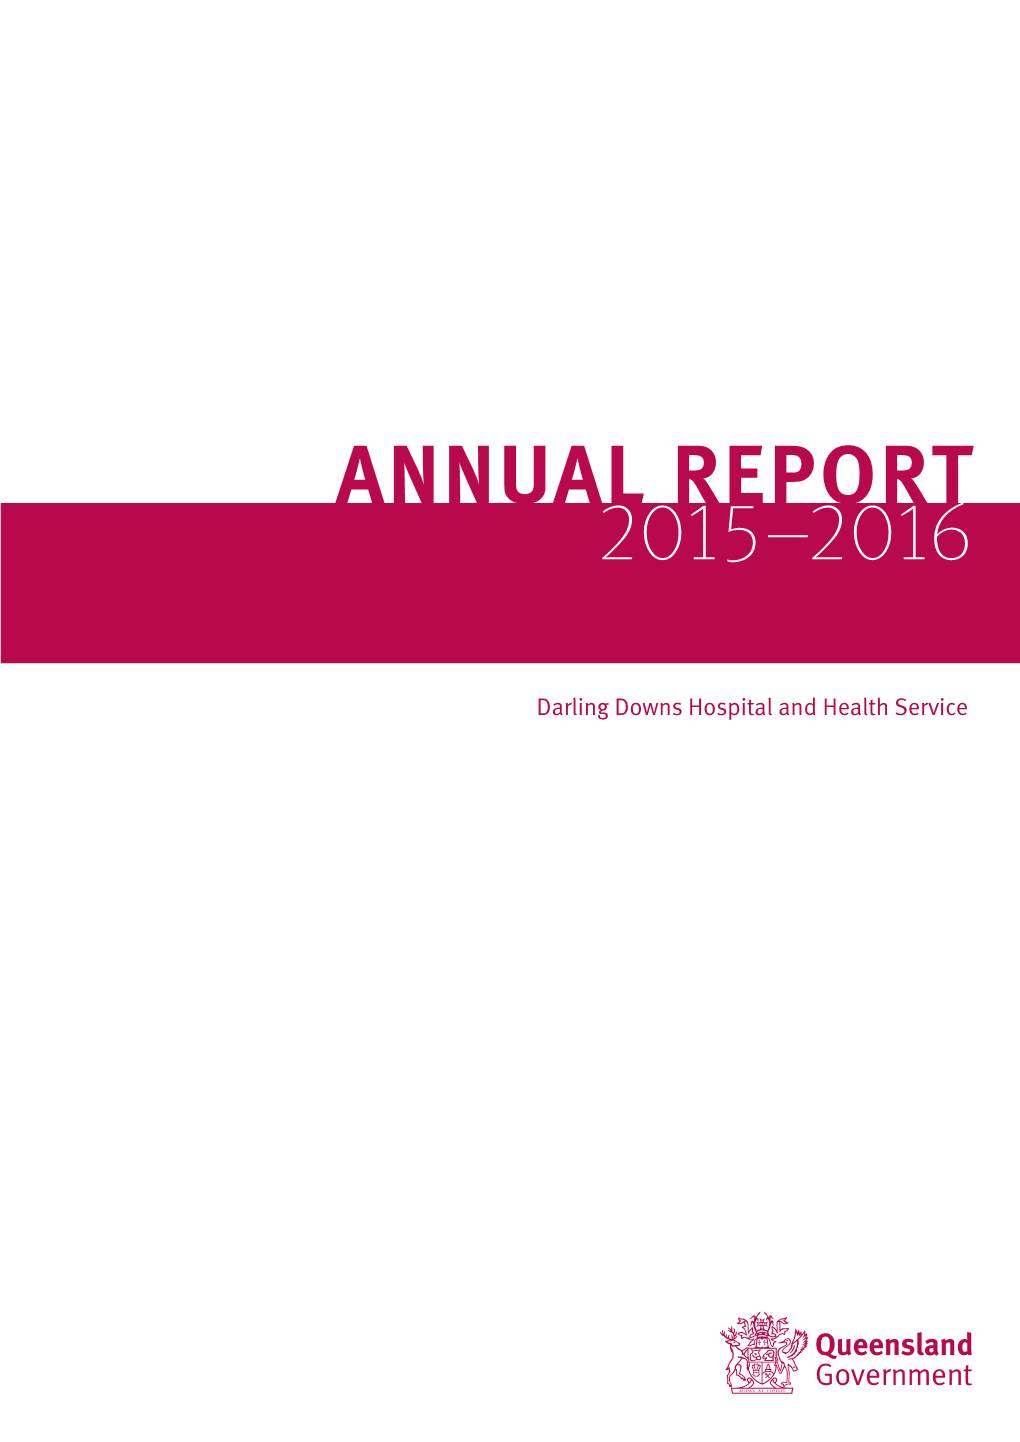 Darling Downs Hospital and Health Service Annual Report 2015-2016